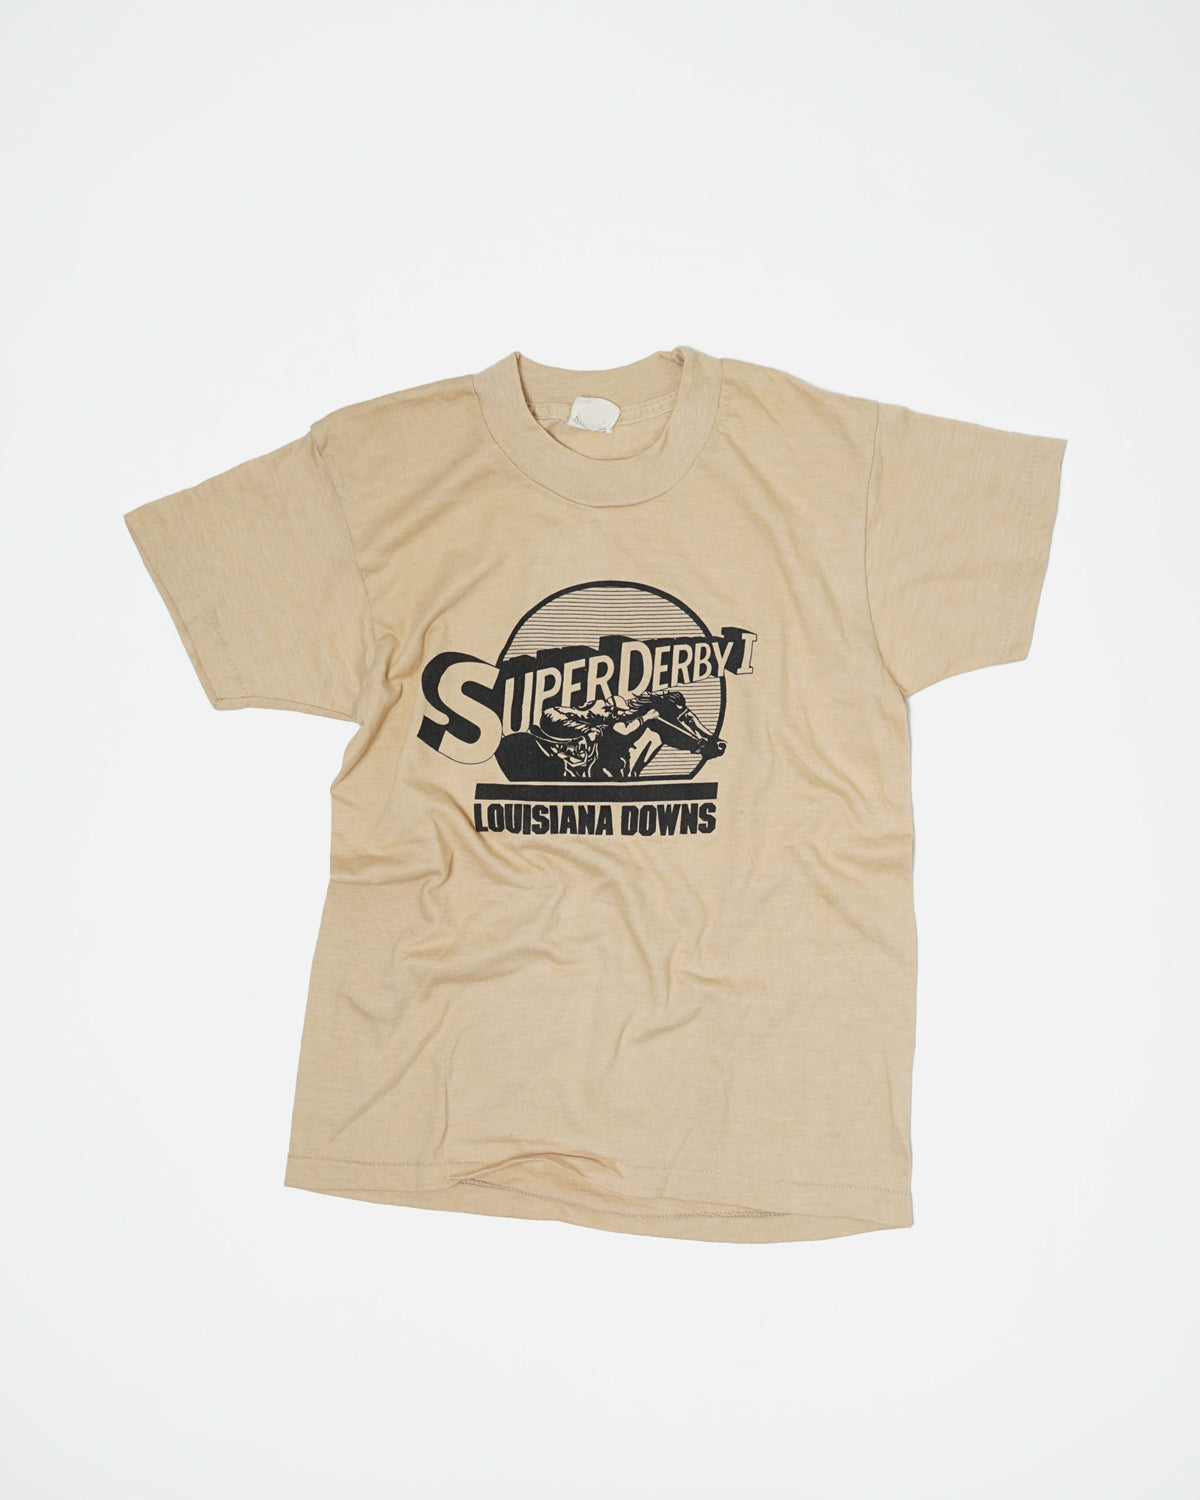 Graphic Tee / Super Derby Louisana Downs